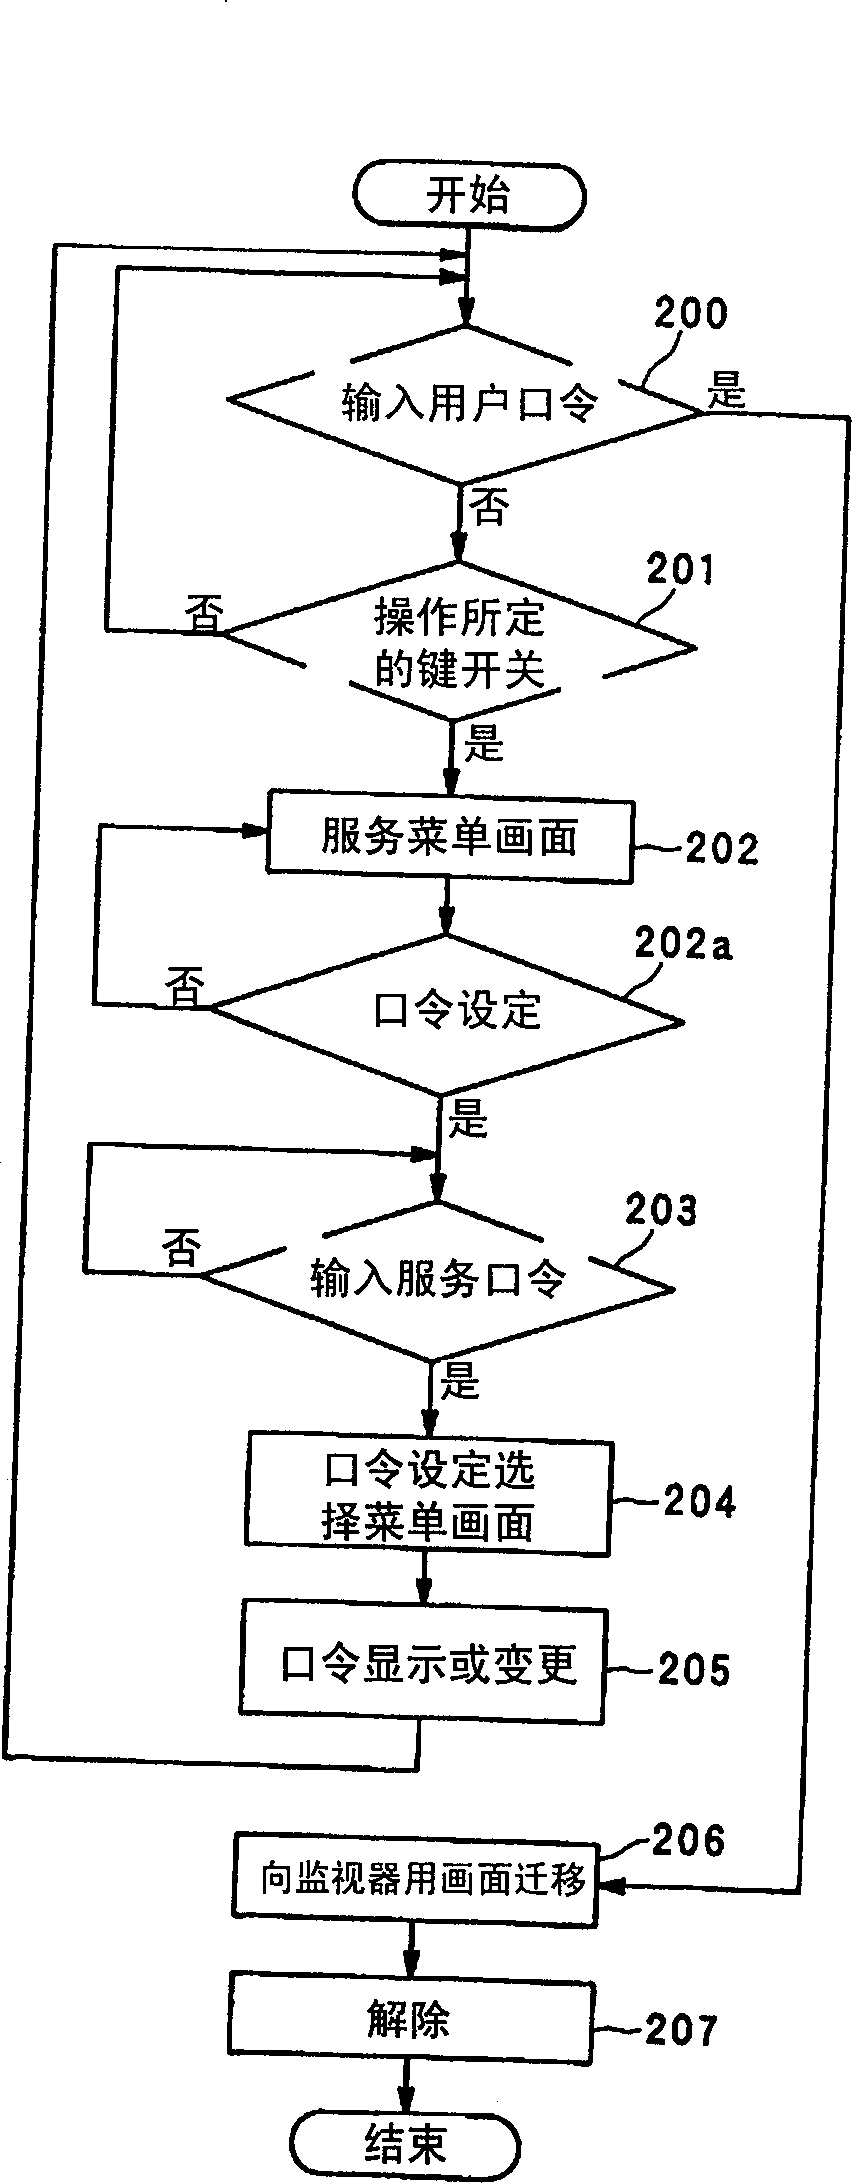 Display device and function locking and releasing device for building machinery